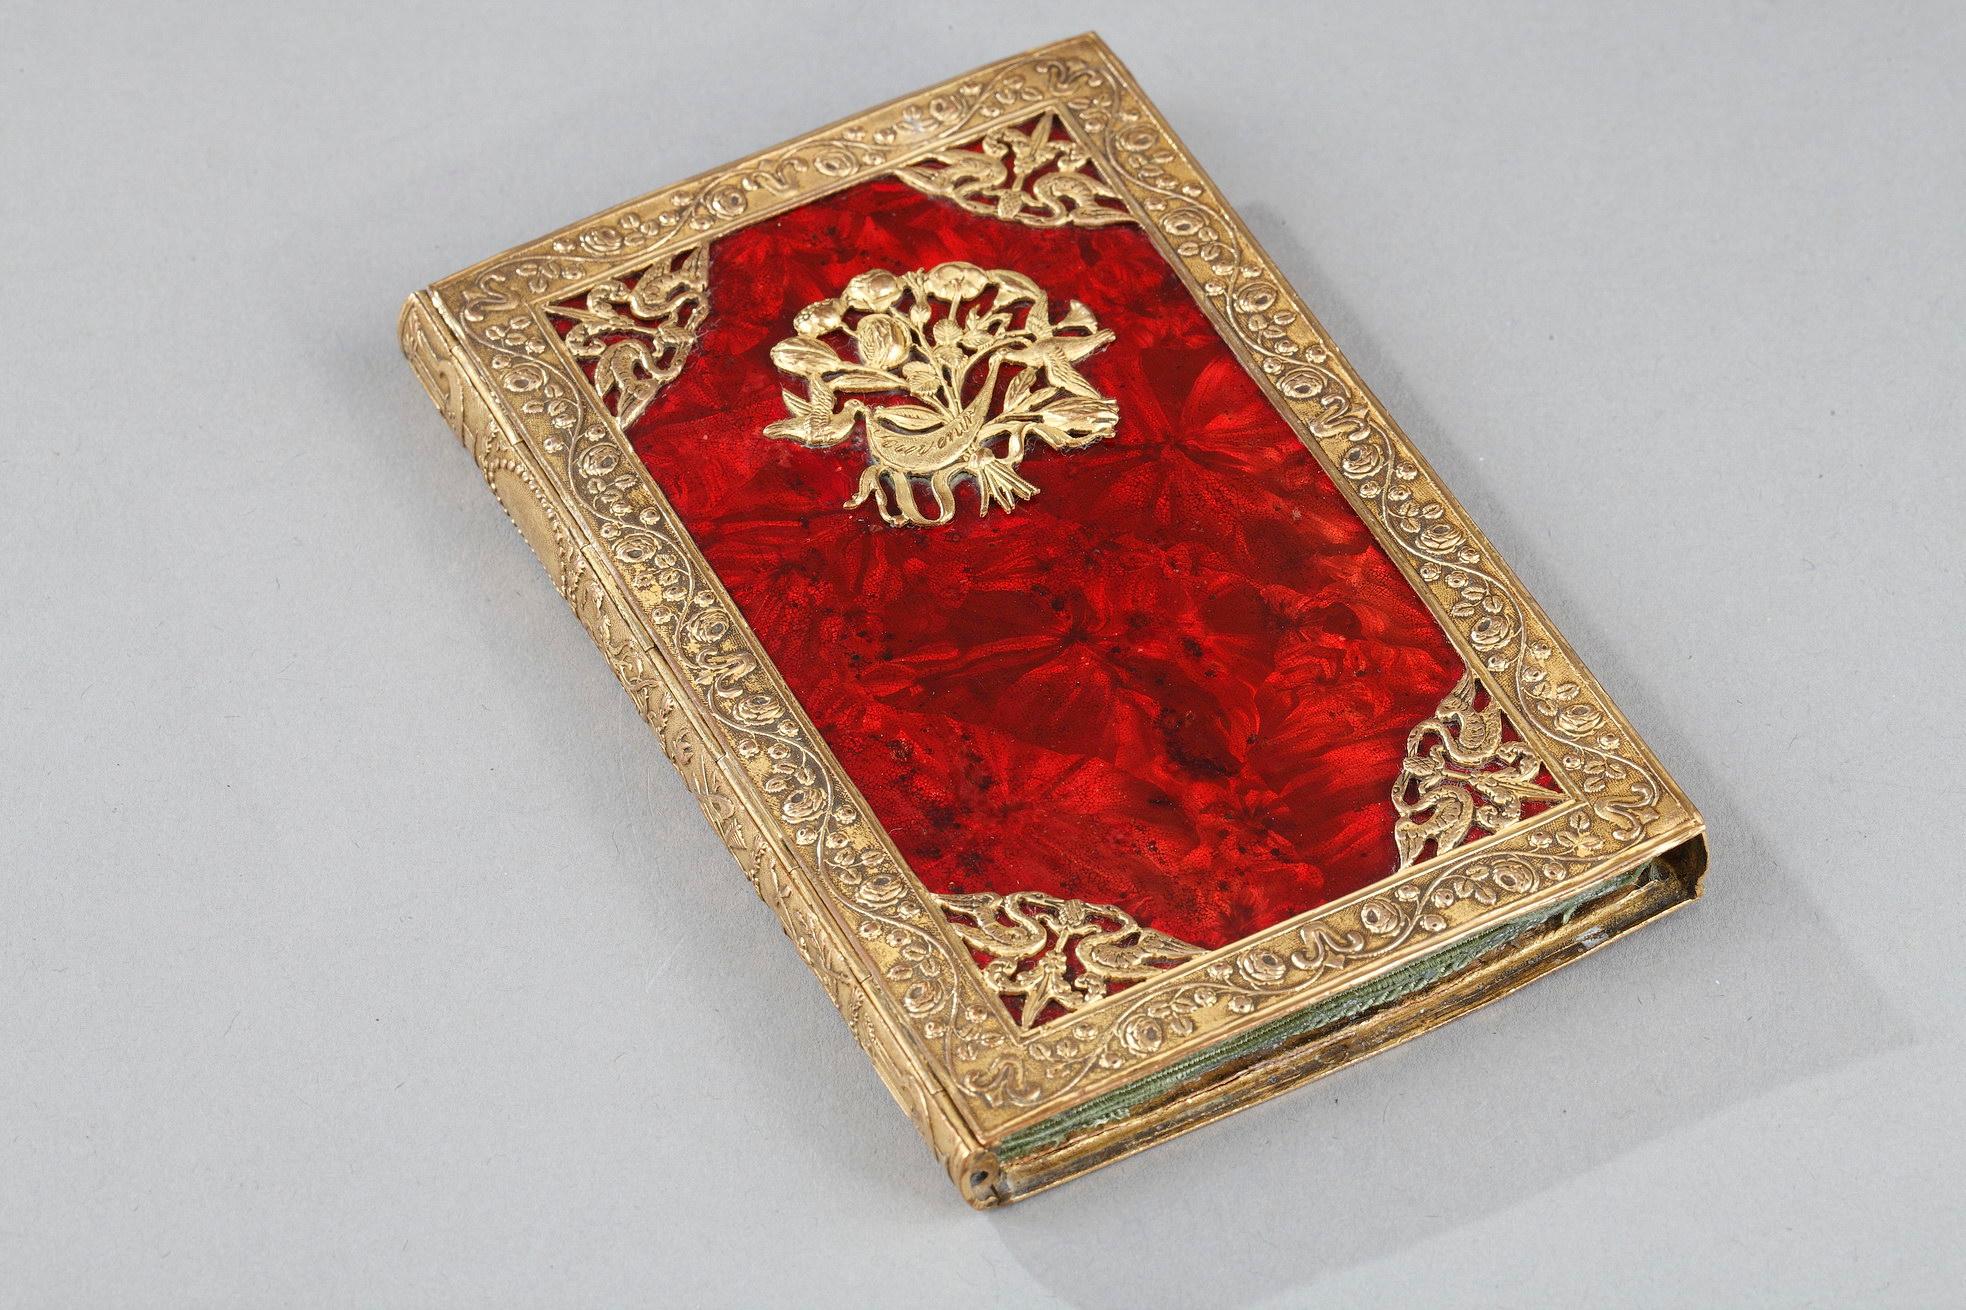 Rectangular dance case in gilded bronze and red colored metal with moire reflections. The gilded bronze mount is finely chiseled with floral friezes, doves patterns in the corners. On the main face, two doves carry in their beaks a motto 